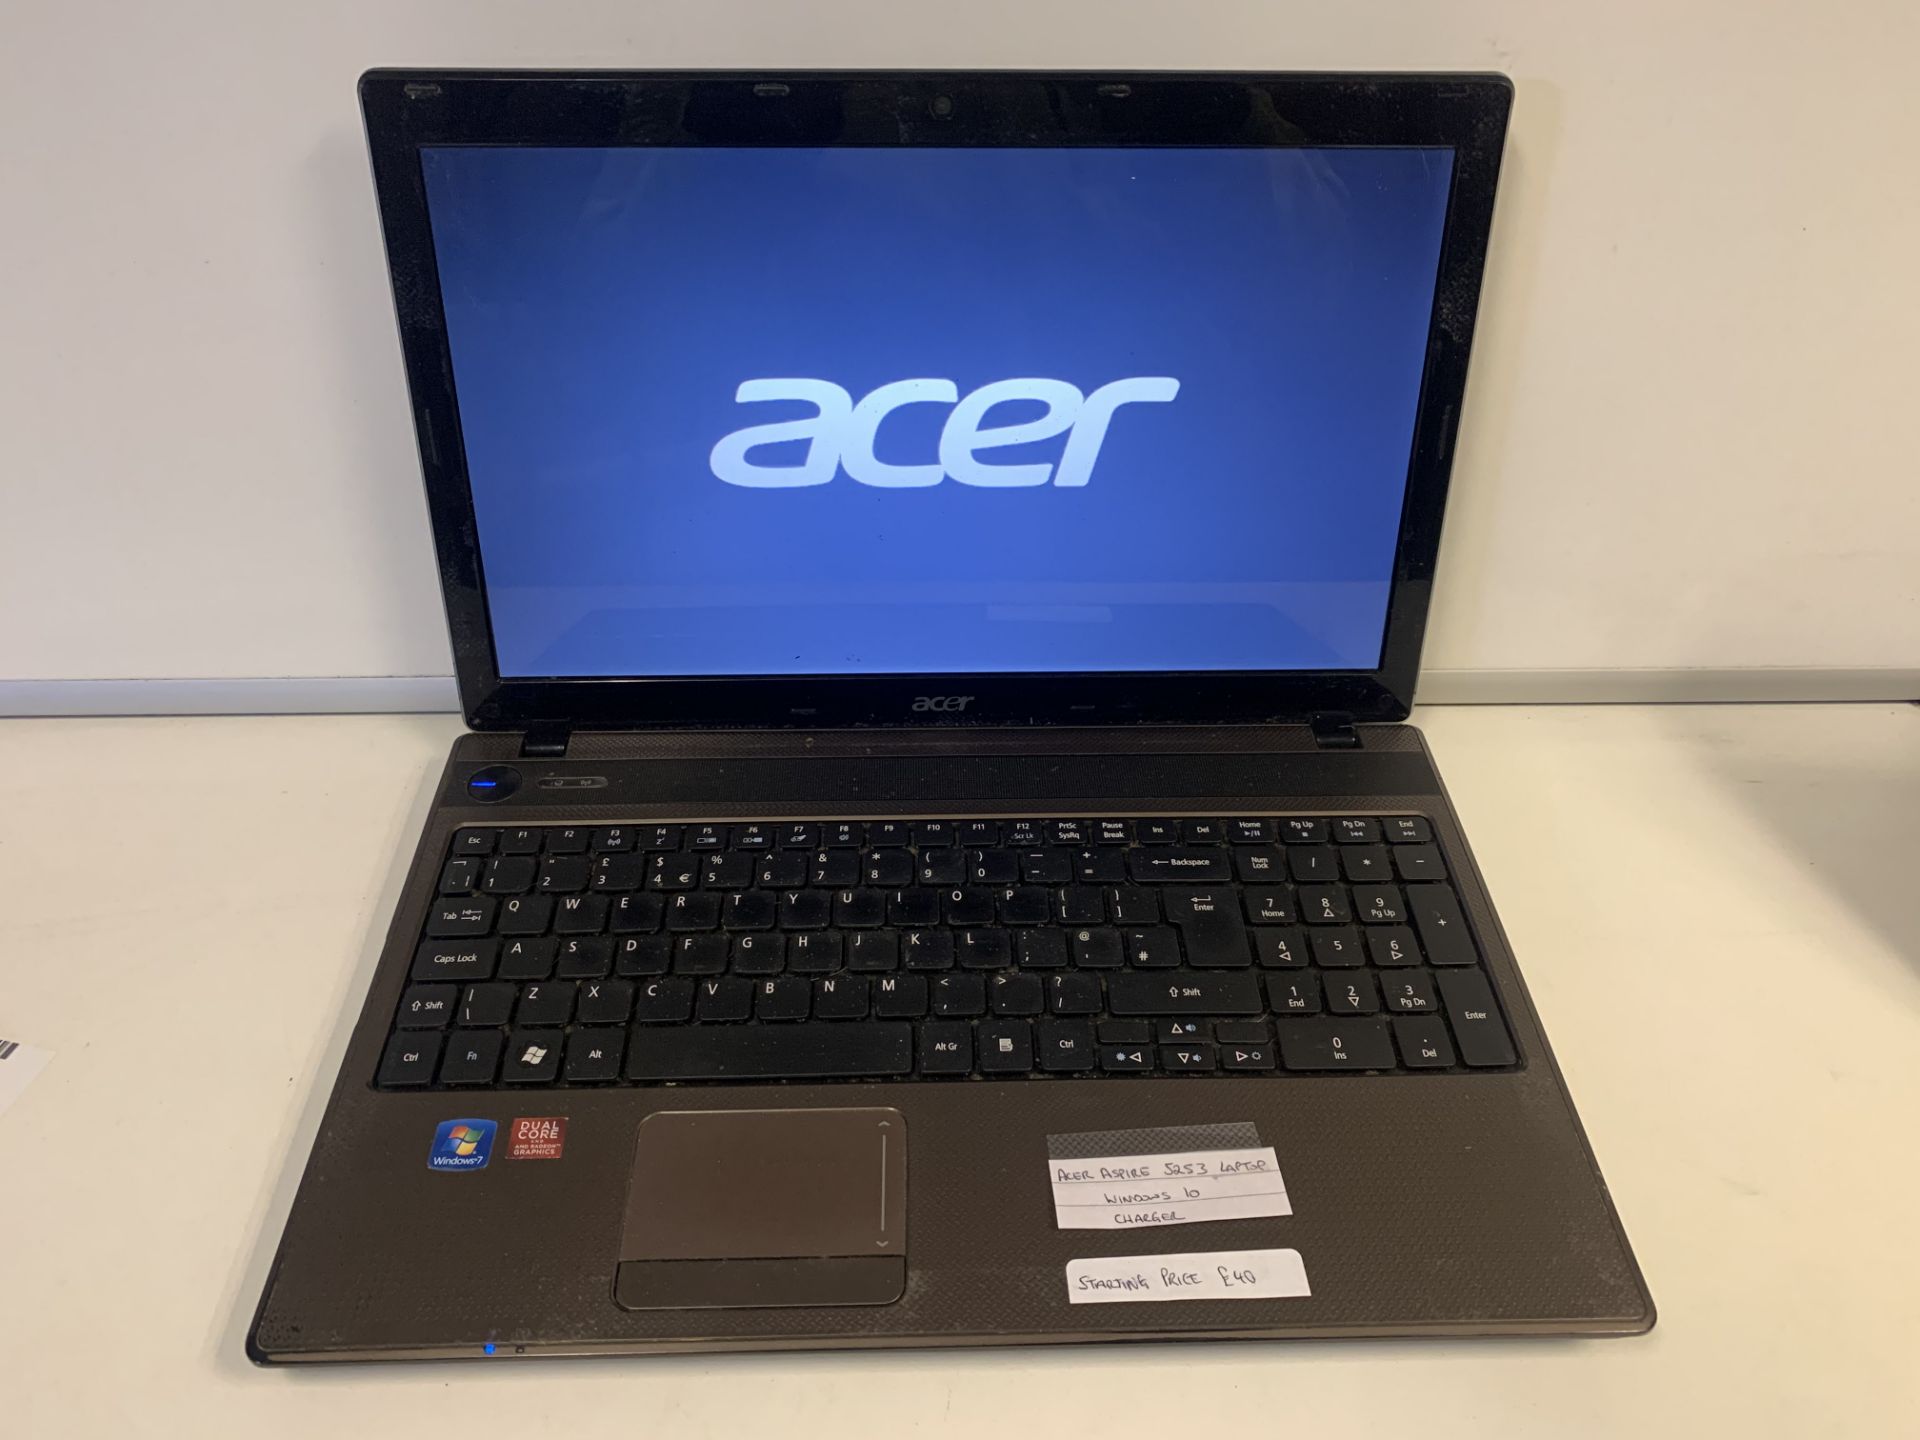 ACER ASPIRE 5253 LAPTOP, WINDOWS 10 WITH CHARGER